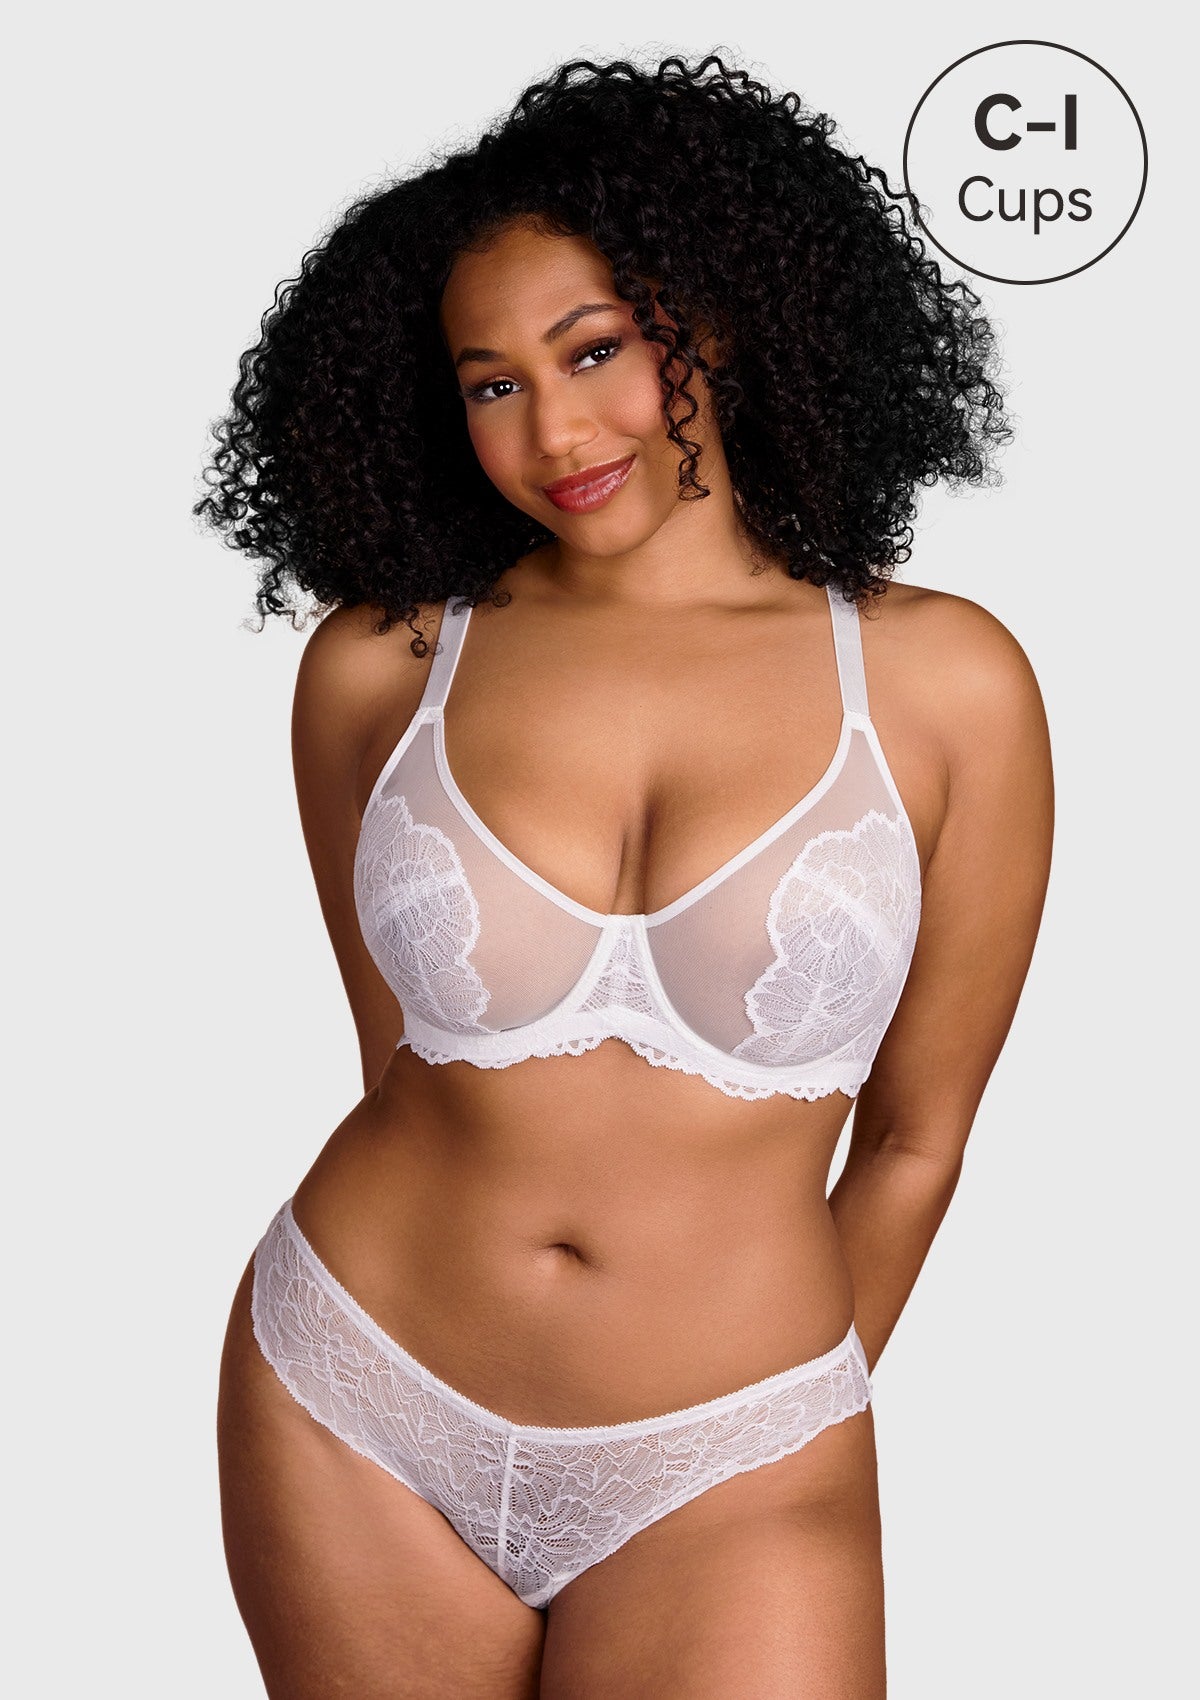 HSIA Blossom Bestseller Unlined Underwire Lace Bra - White / 38 / I